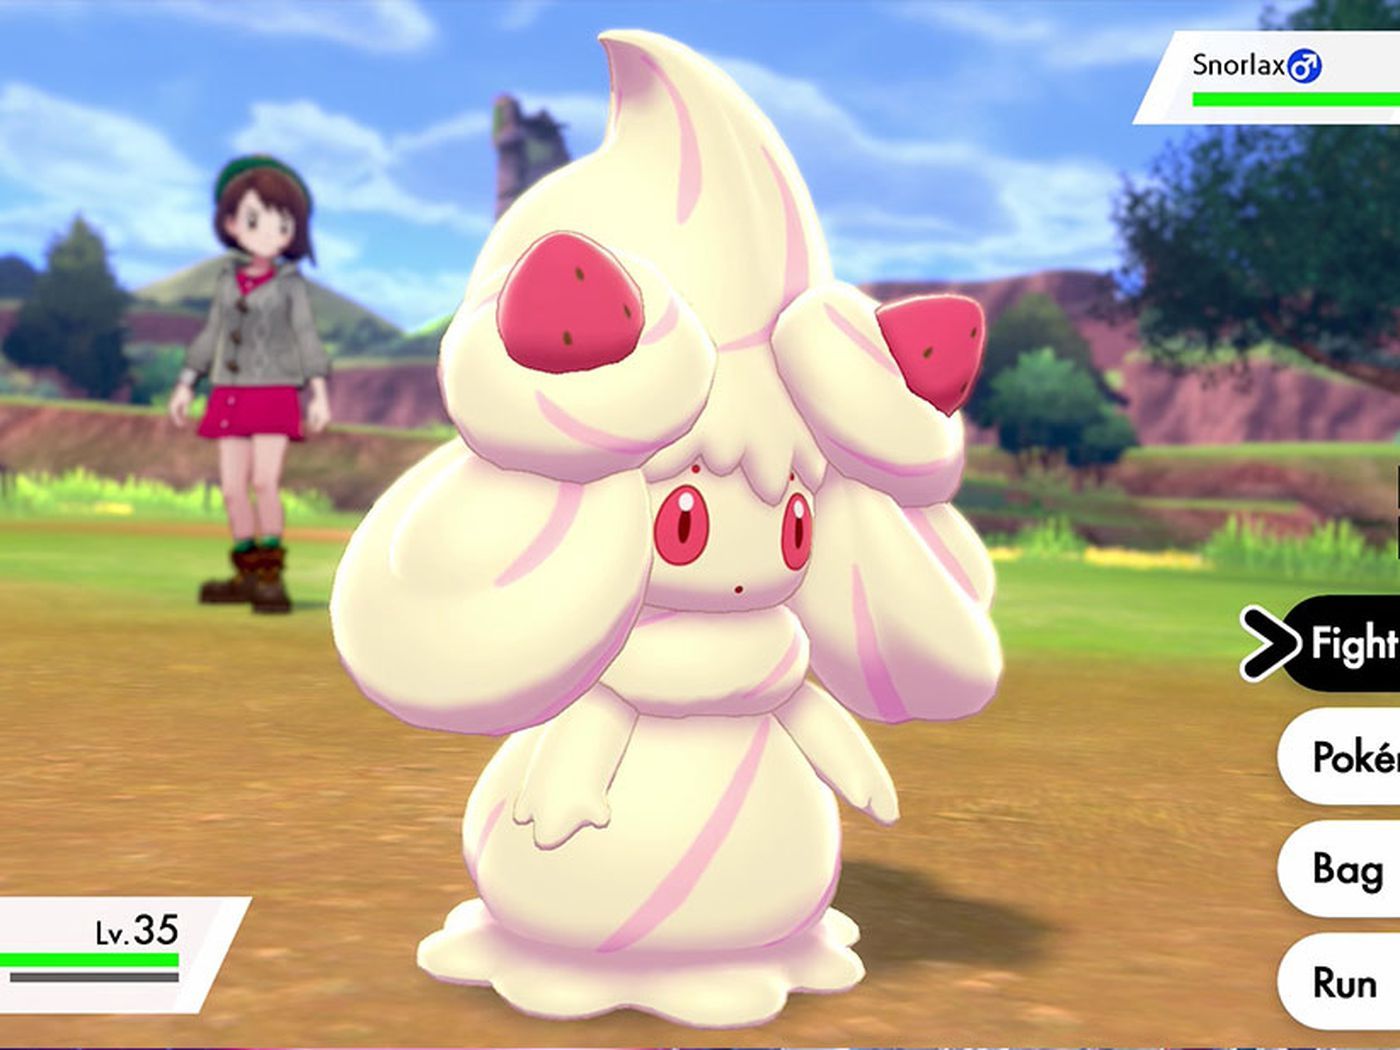 There Is Nothing Untoward About This Sentient Cream Pokémon